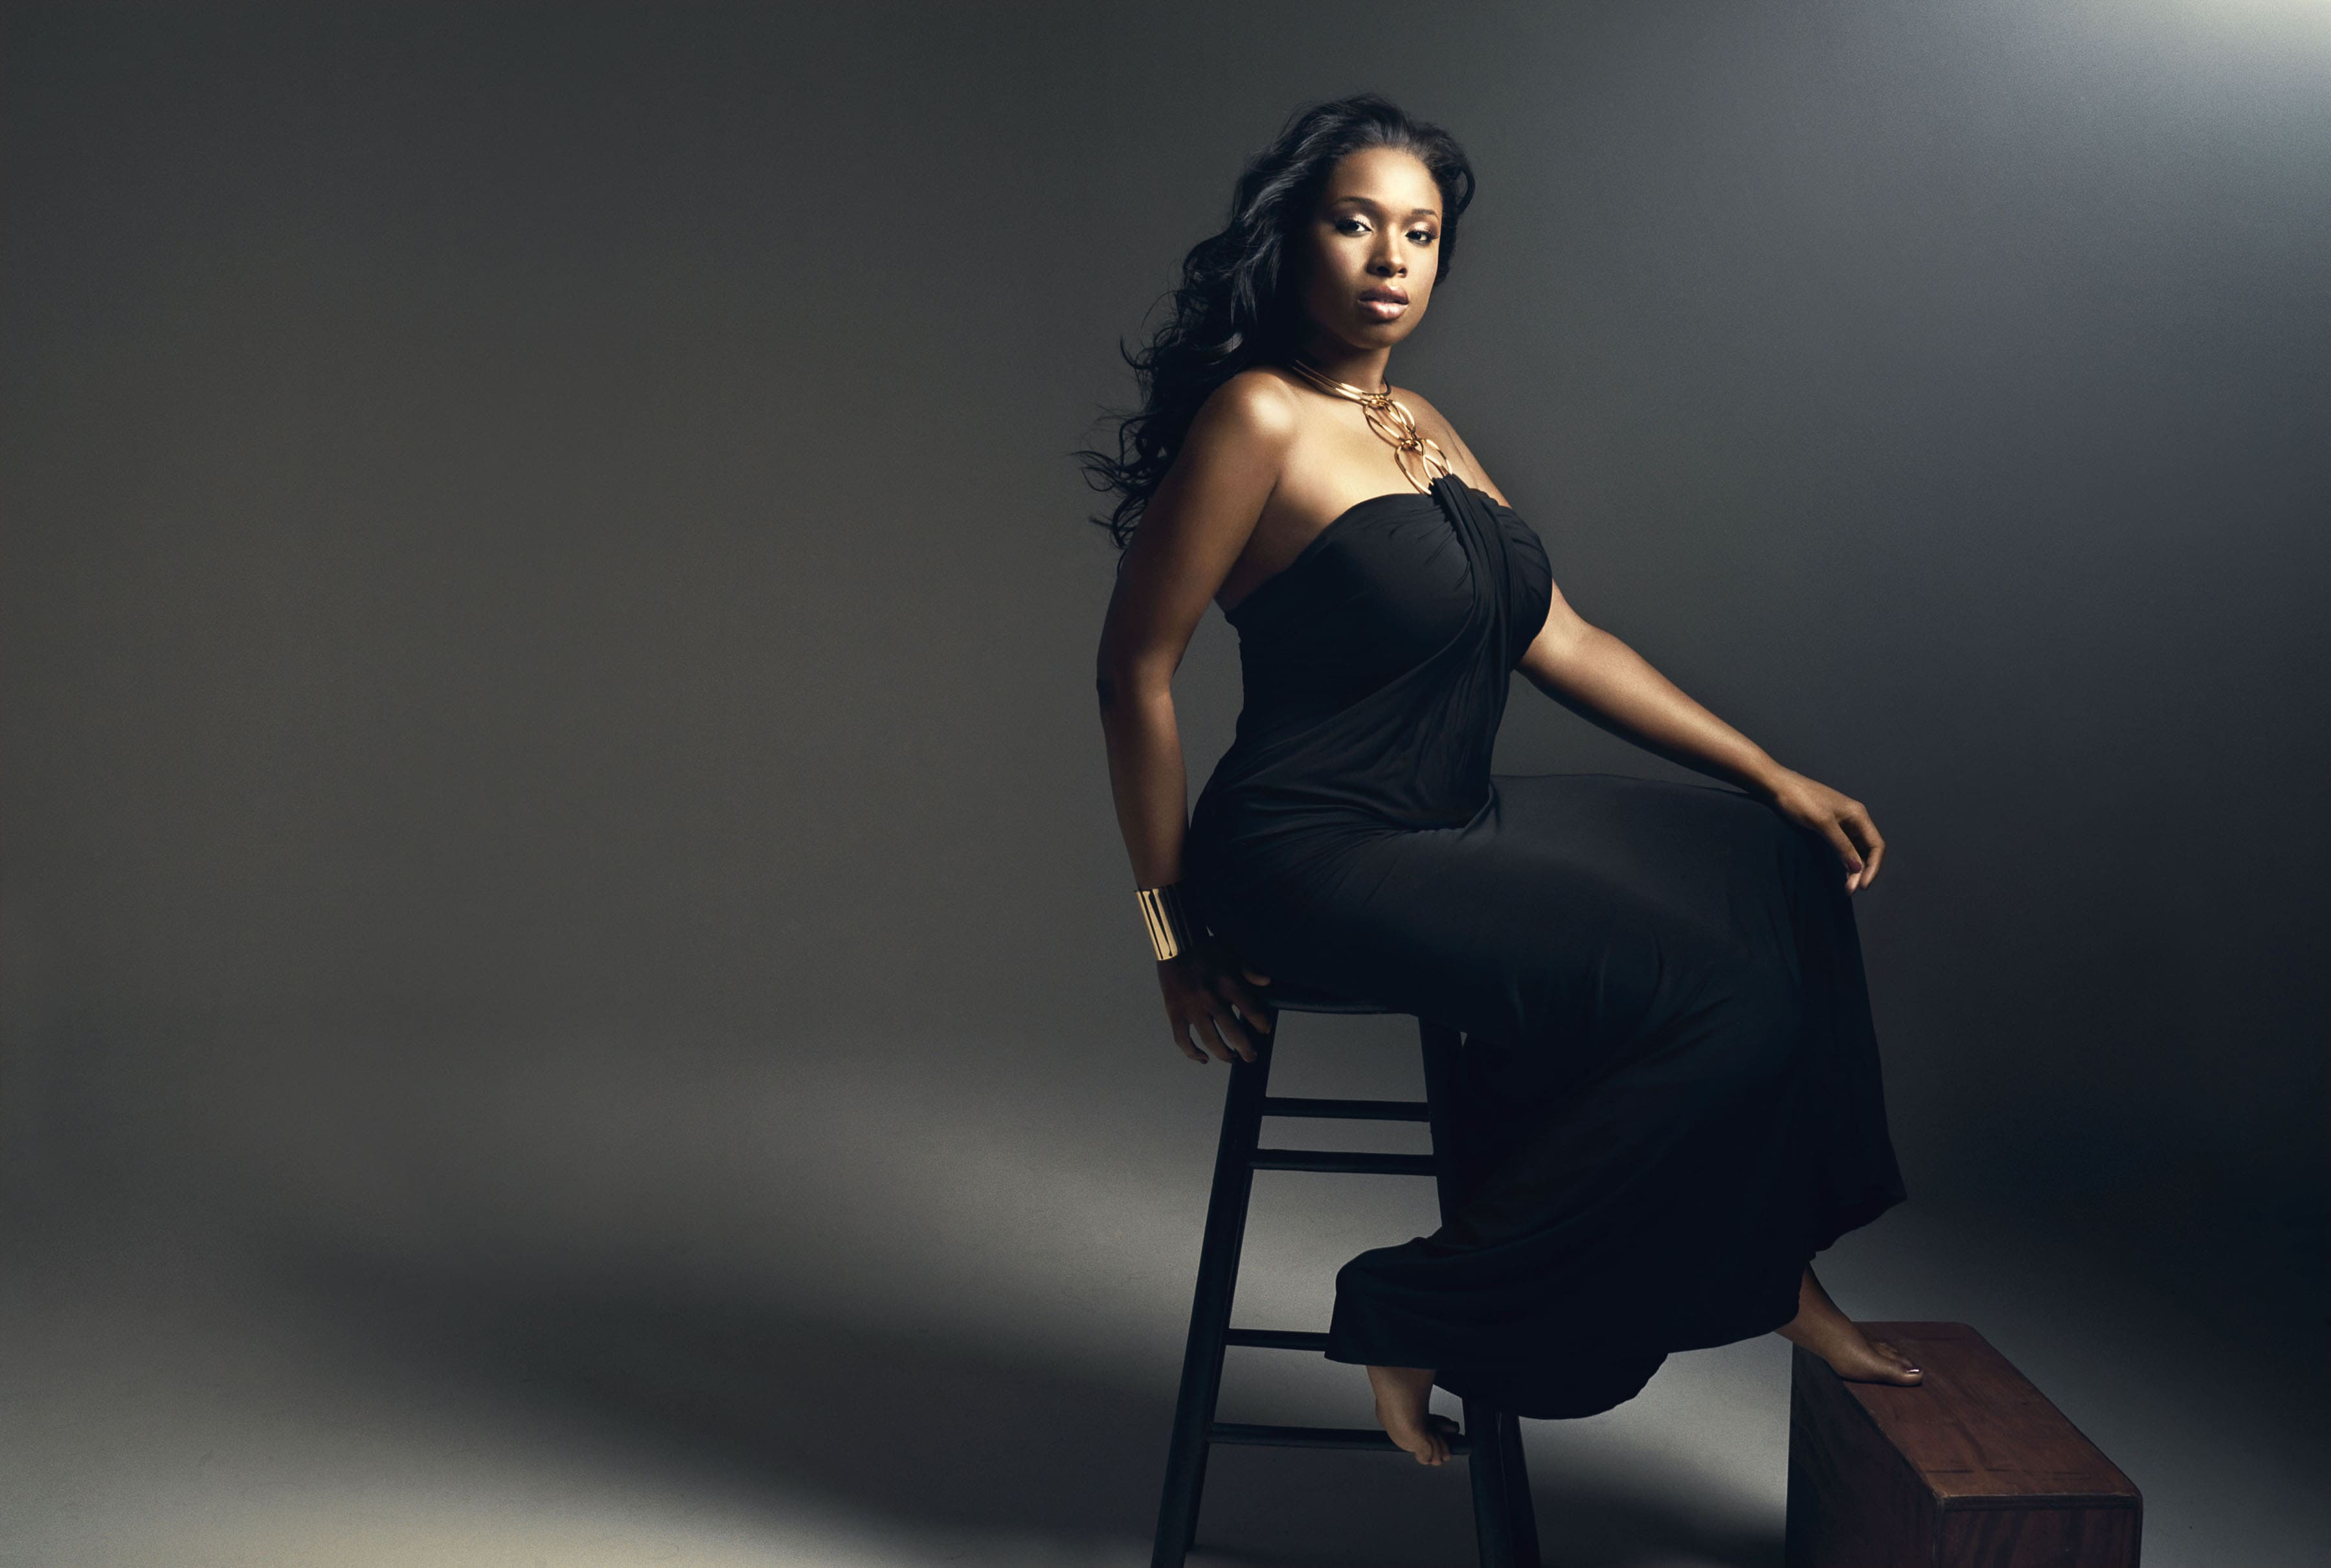 60+ Hot Pictures Of Jennifer Hudson Are Just Too Damn Delicious | Best Of Comic Books